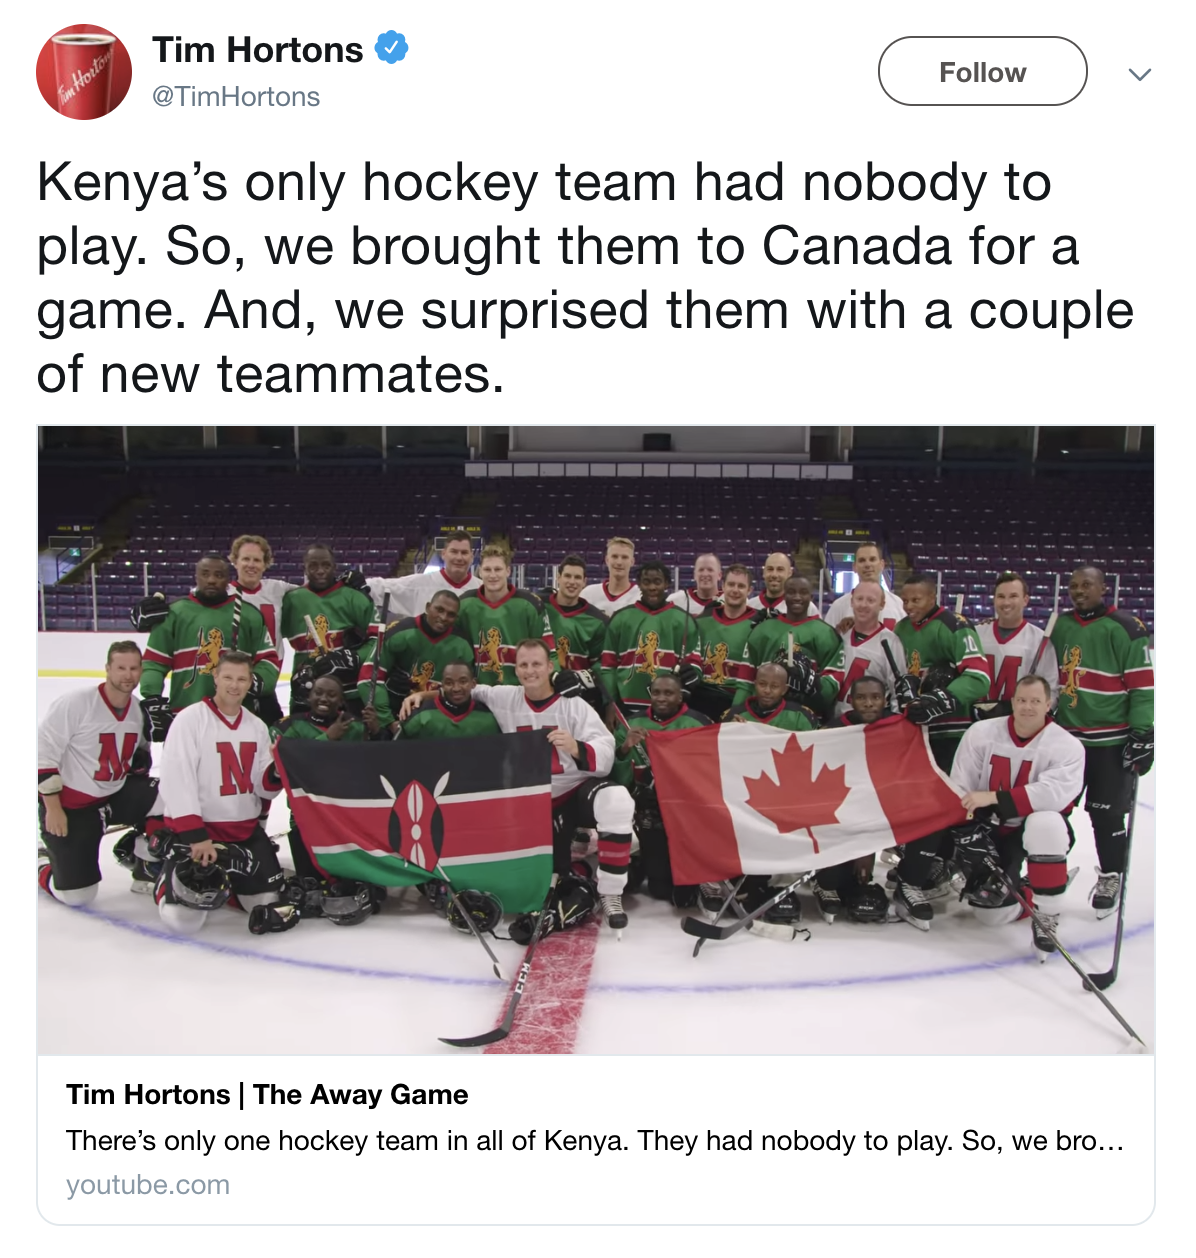 Tim Hortons brought Kenya's only hockey team to Canada for a game